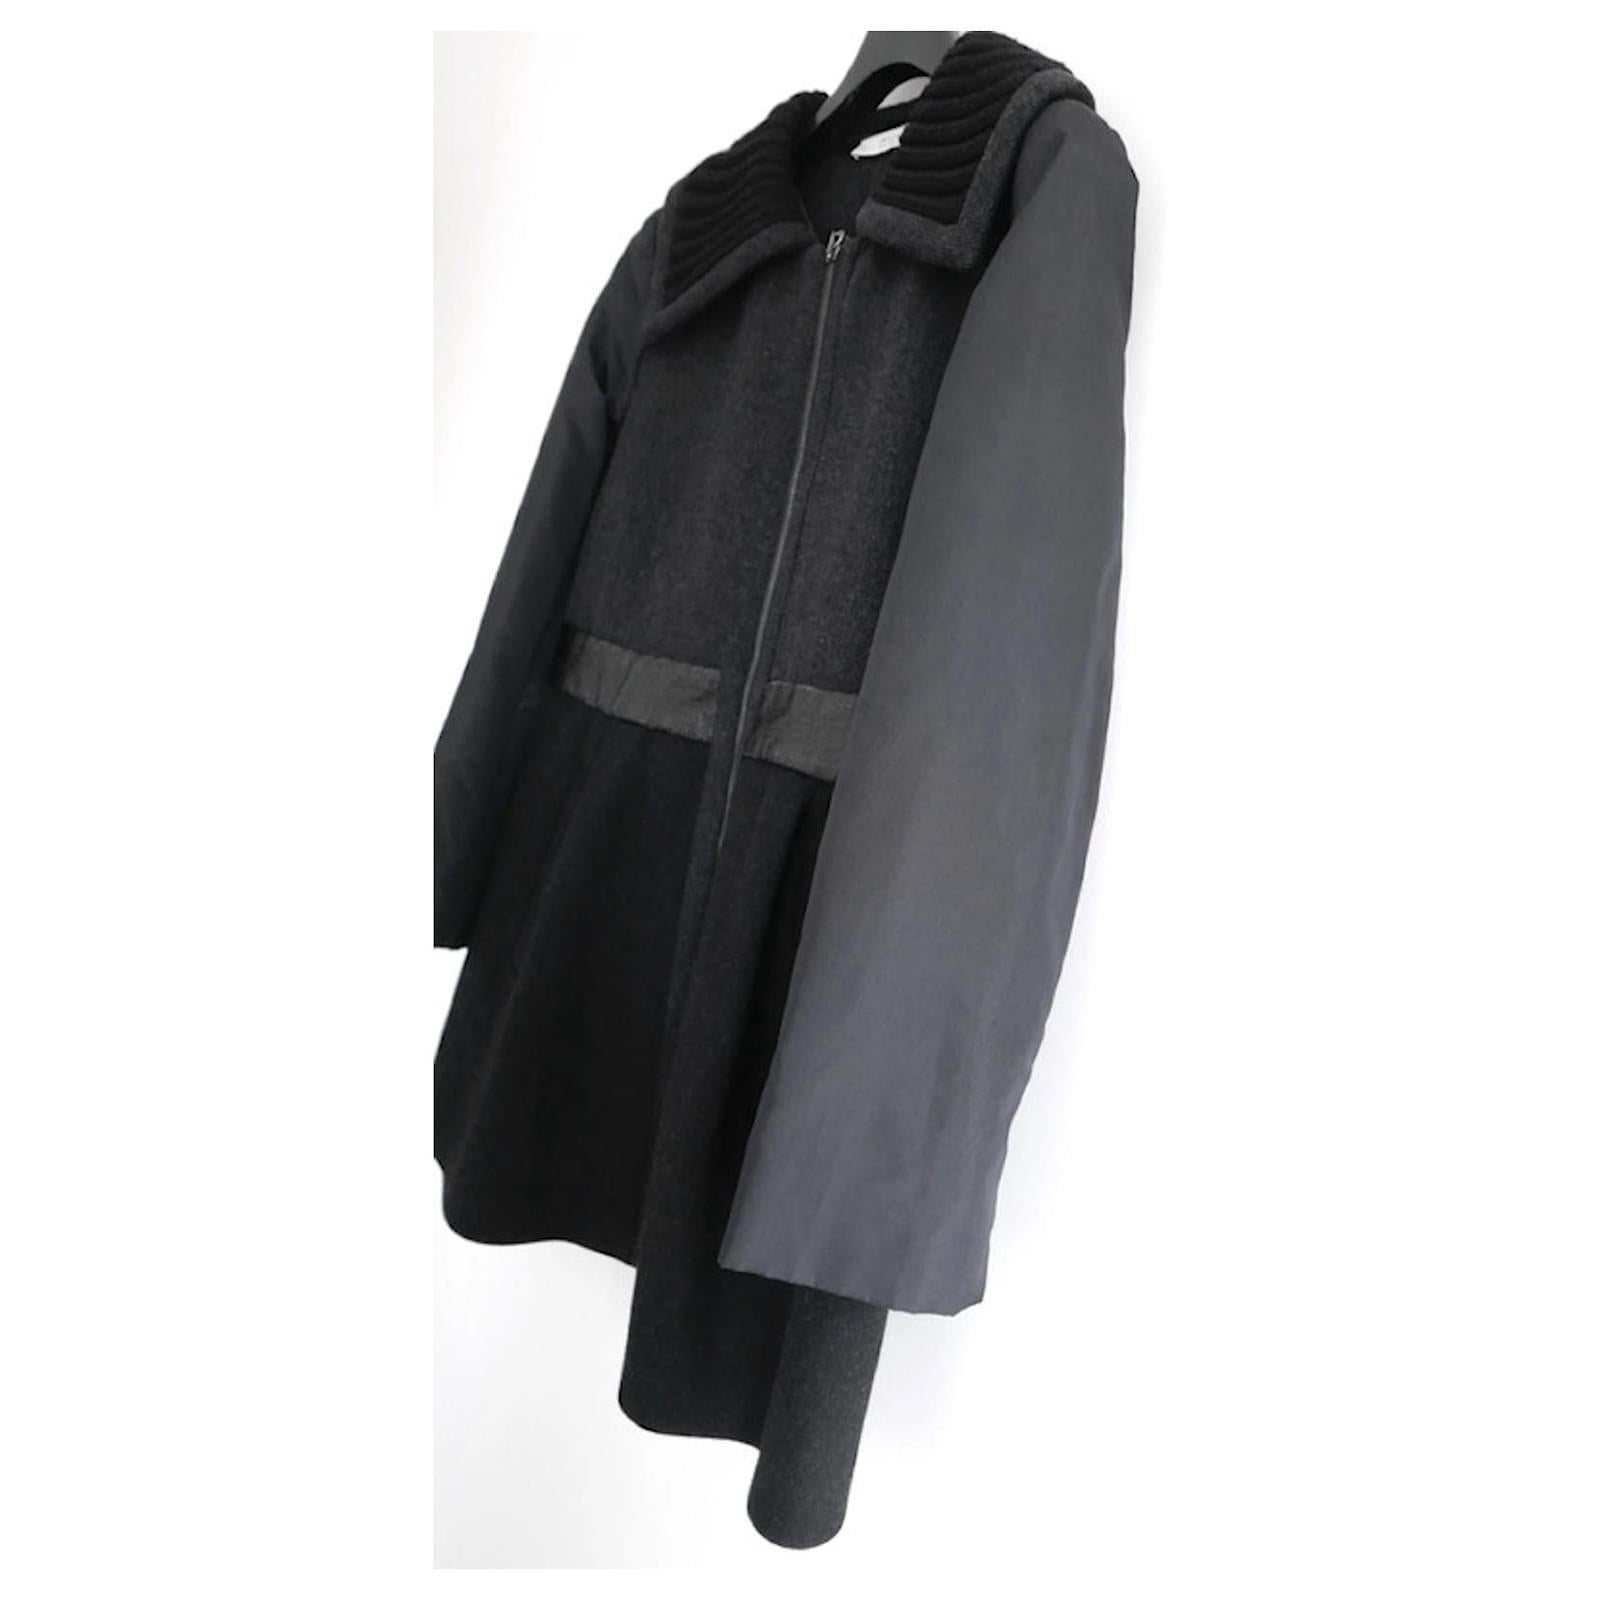 Fabulous archival Prada coat from the Fall 2006 collection. made from soft, thick grey and black wool with black nylon sleeves, knitted collar and crackled patent leather waistband. It has a very flattering fit and flare cut with welt front pockets